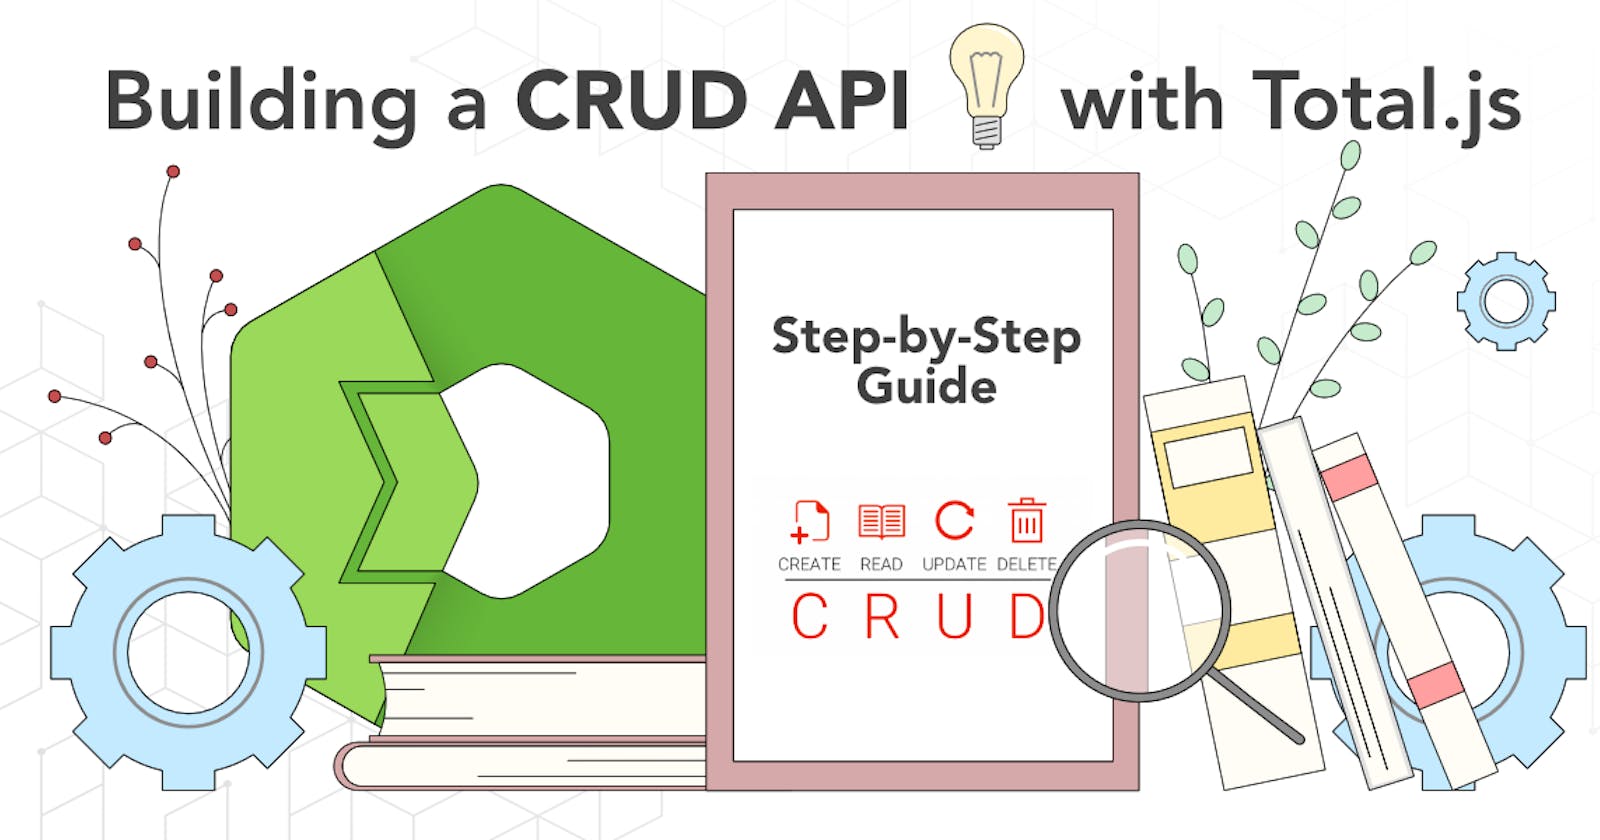 Building a CRUD API with Total.js: A Step-by-Step Guide